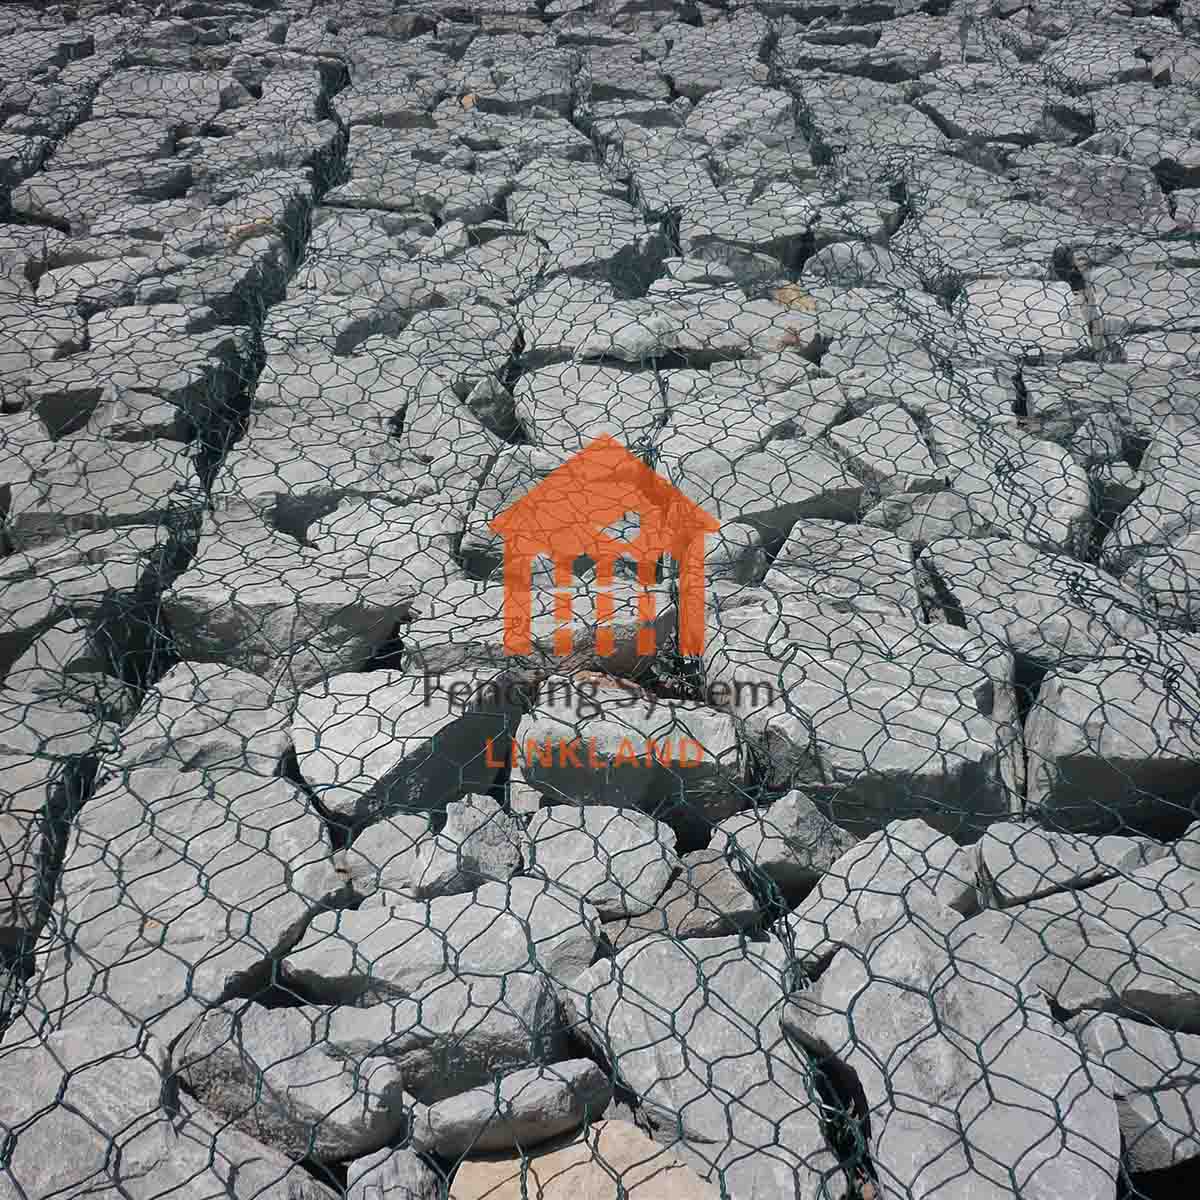 Sustainable Landscaping with Woven Gabion Baskets: Applications and Techniques